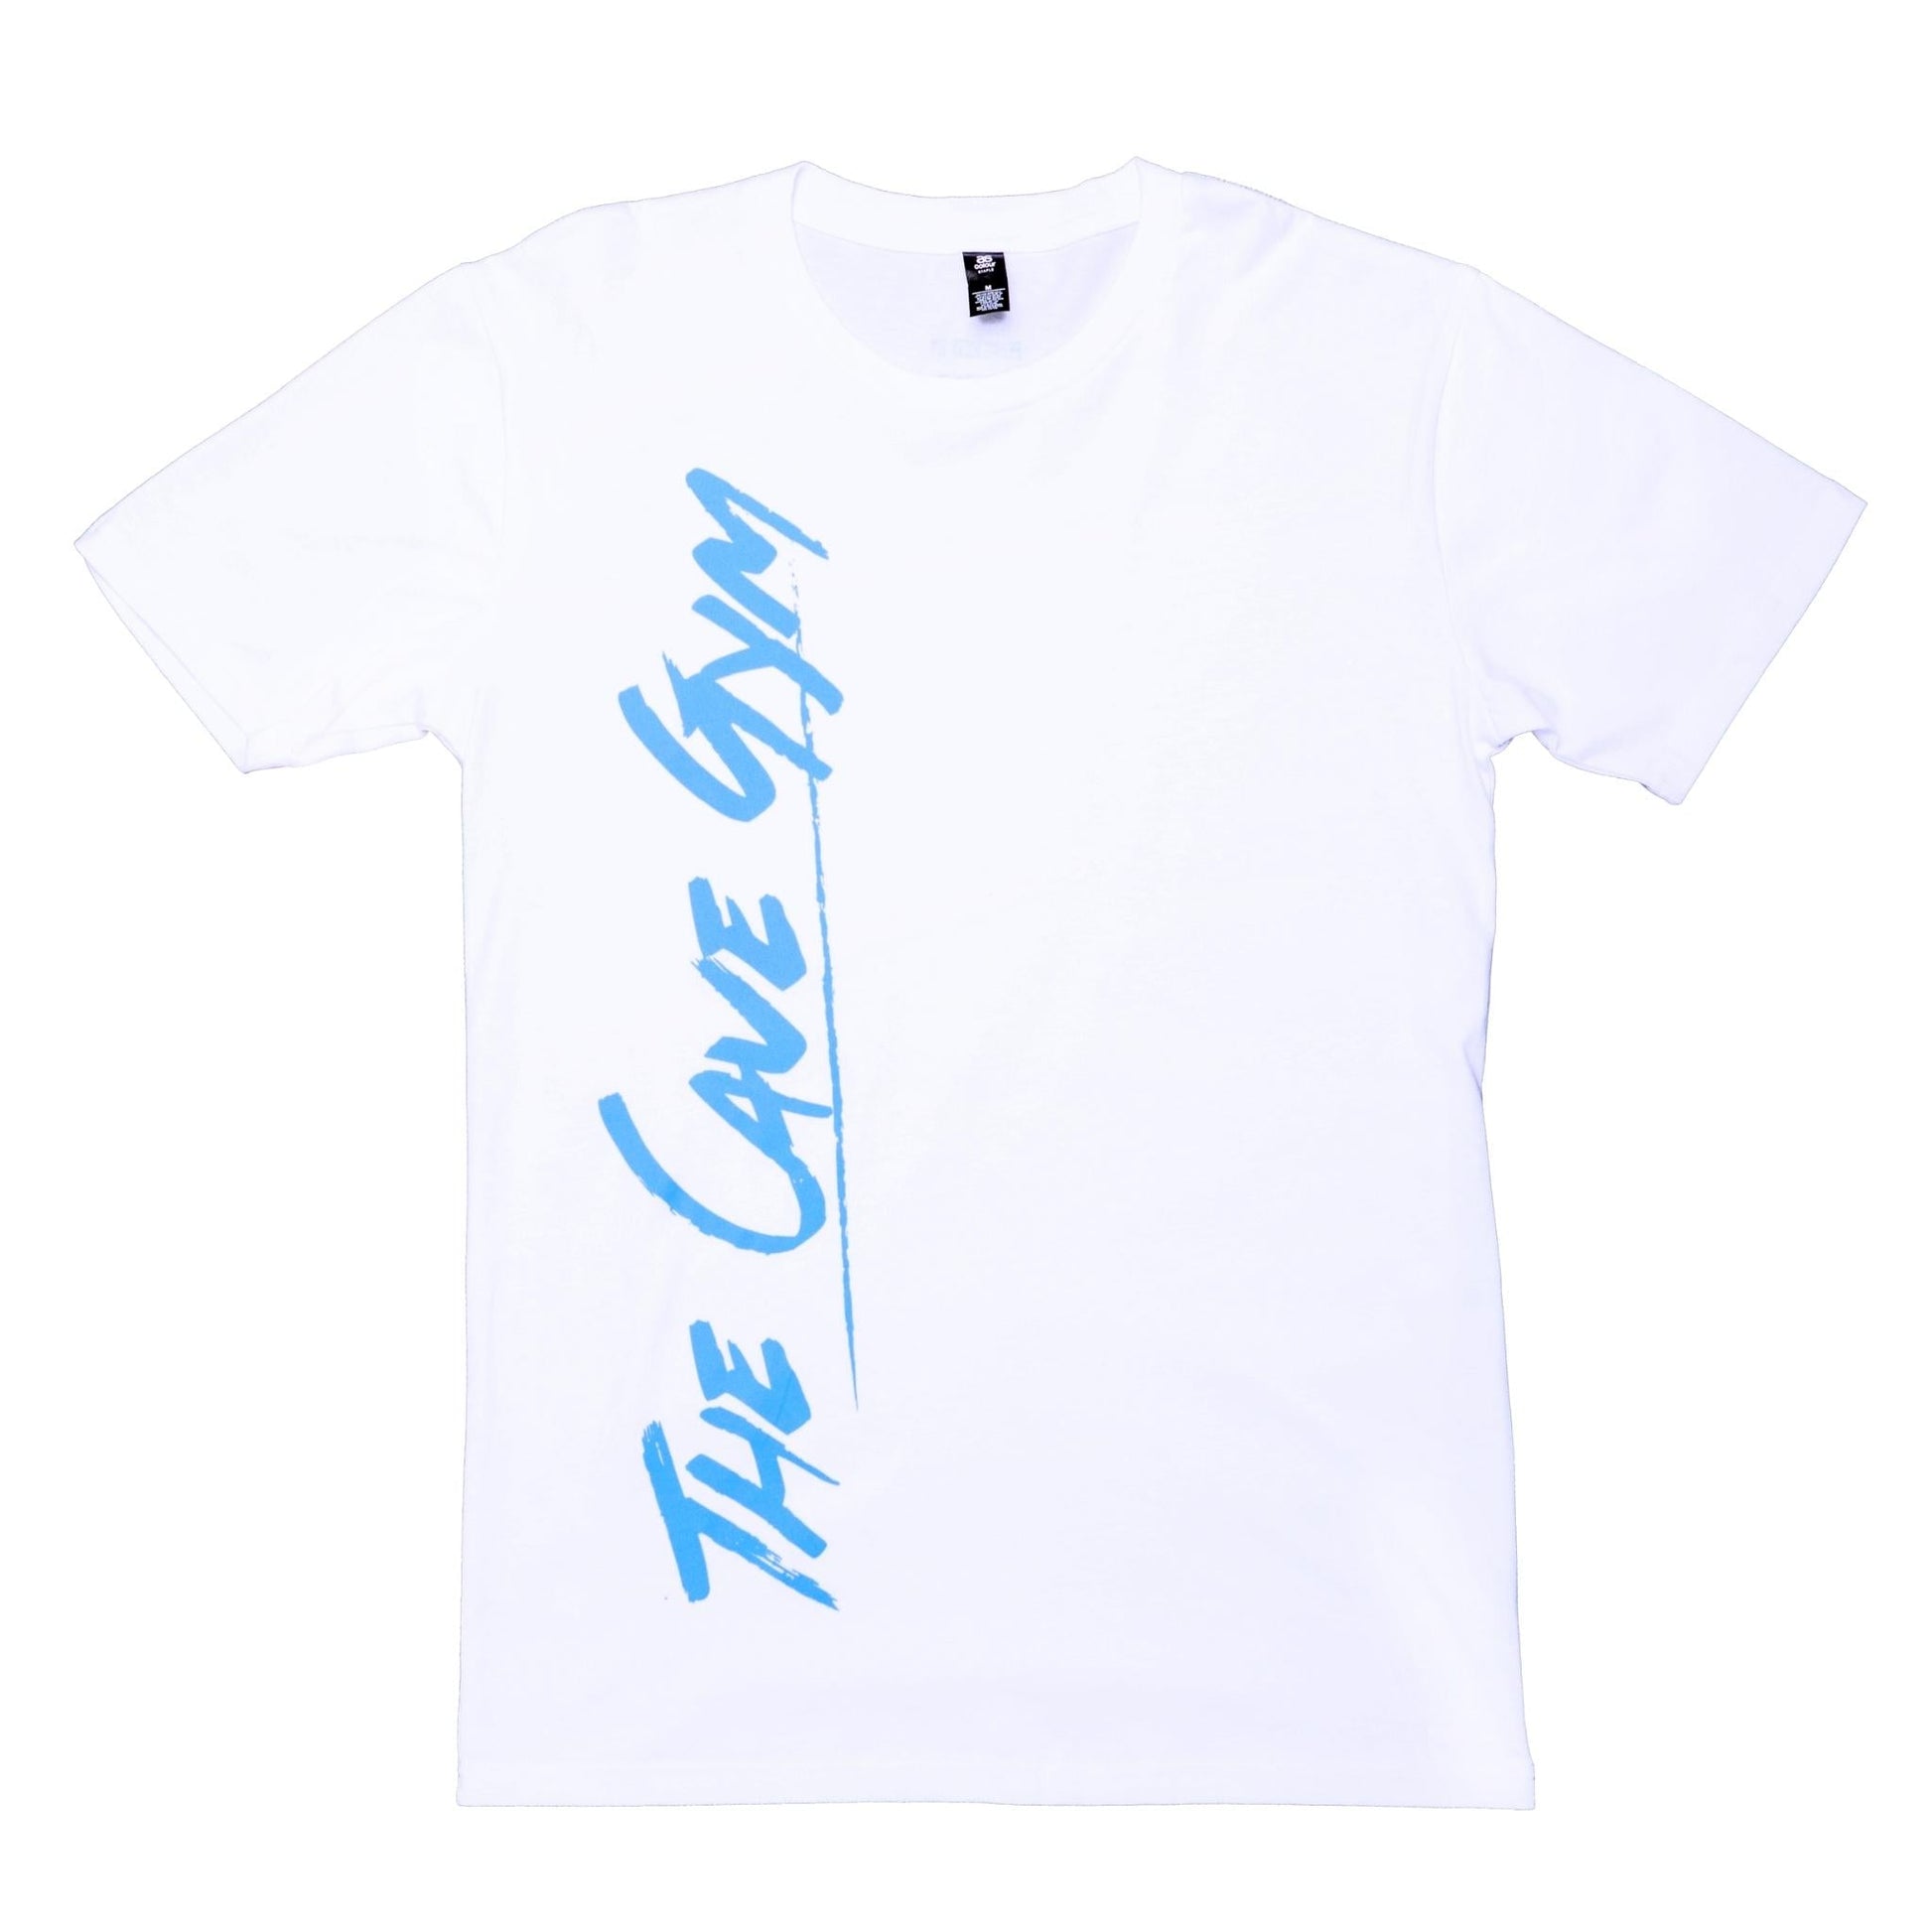 Cave Gym Men's Staple T-Shirt White - Merchandise - Small - The Cave Gym